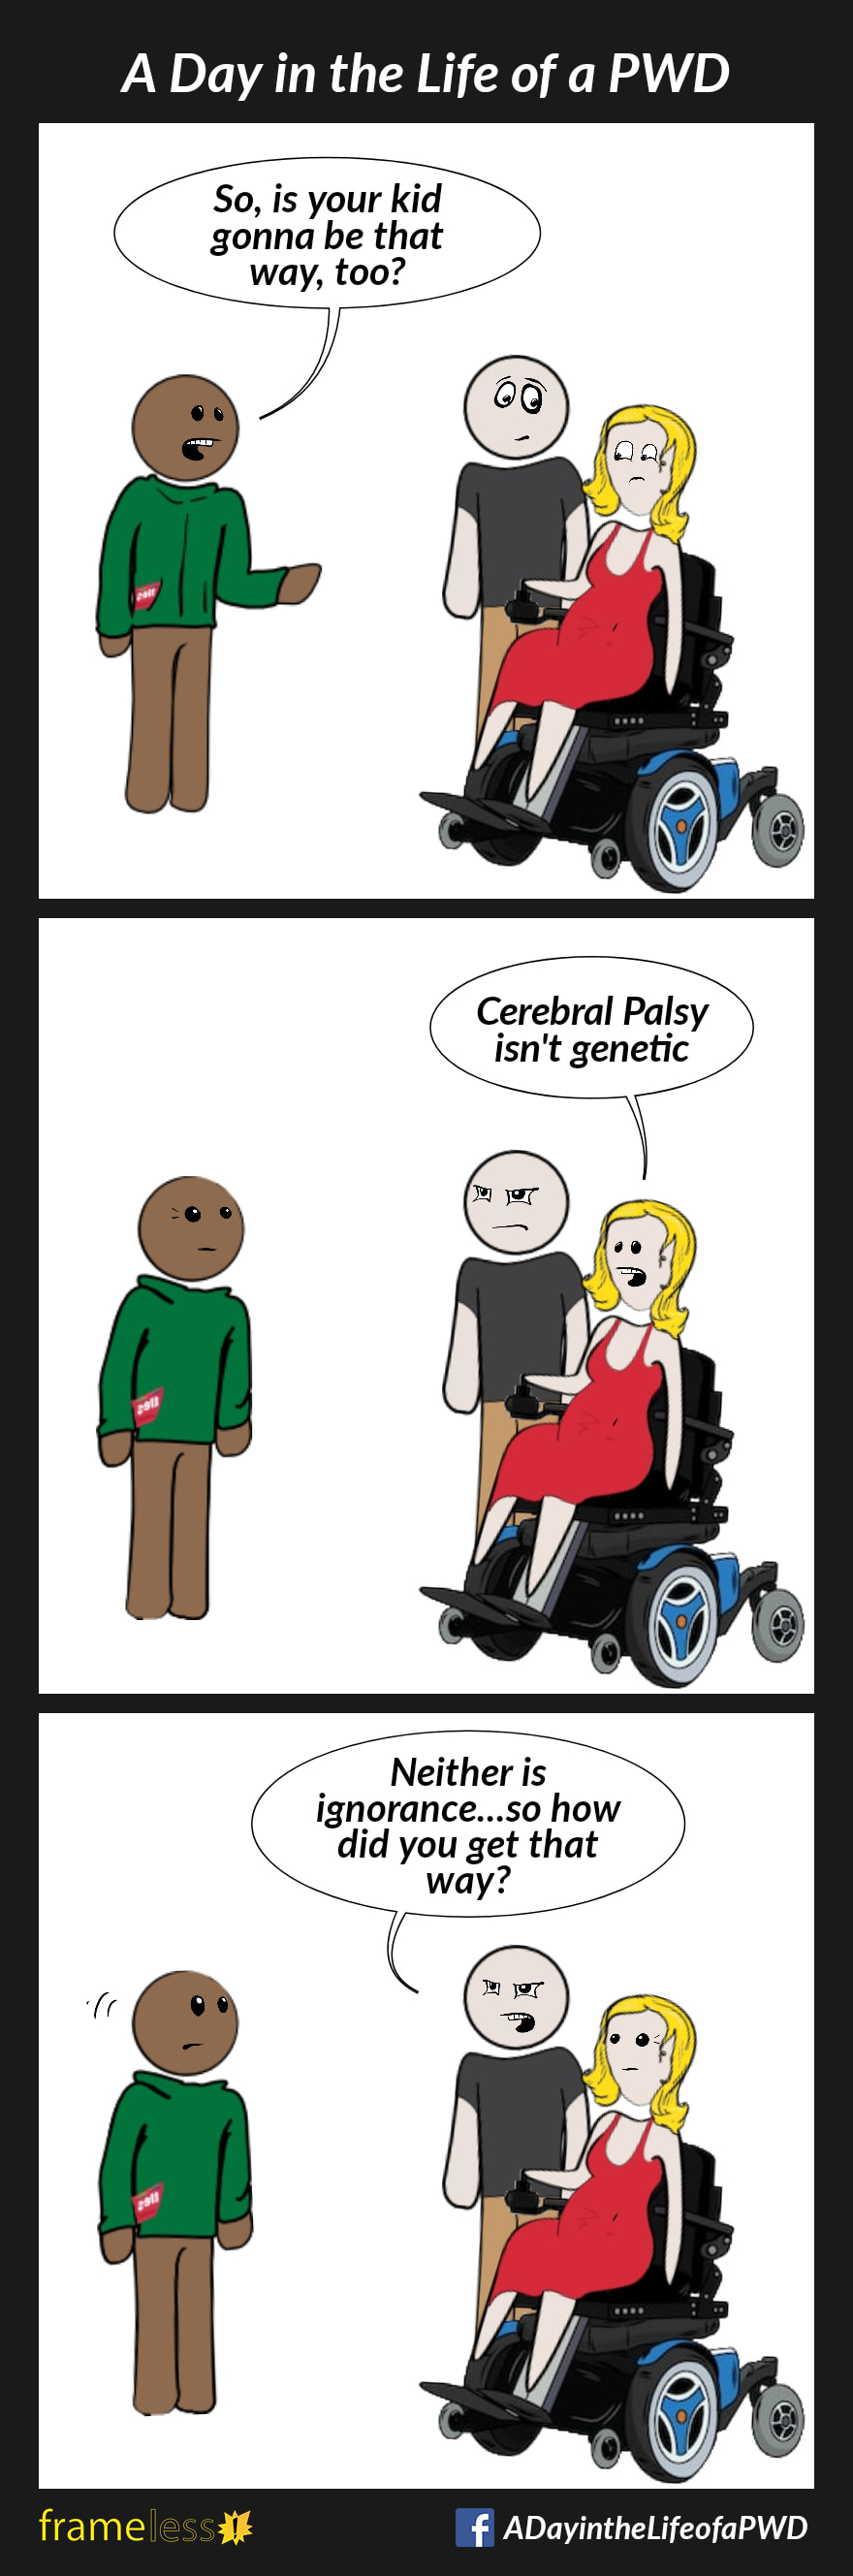 COMIC STRIP 
A Day in the Life of a PWD (Person With a Disability) 

Frame 1:
A pregnant woman in a power wheelchair and her husband are talking to a man. 
MAN: So, is your kid gonna be that way, too?
The couple eye each other.

Frame 2:
The husband frowns.
WOMAN: Cerebral Palsy isn't genetic

Frame 3:
HUSBAND (to man): Neither is ignorance...so, how did you get that way?